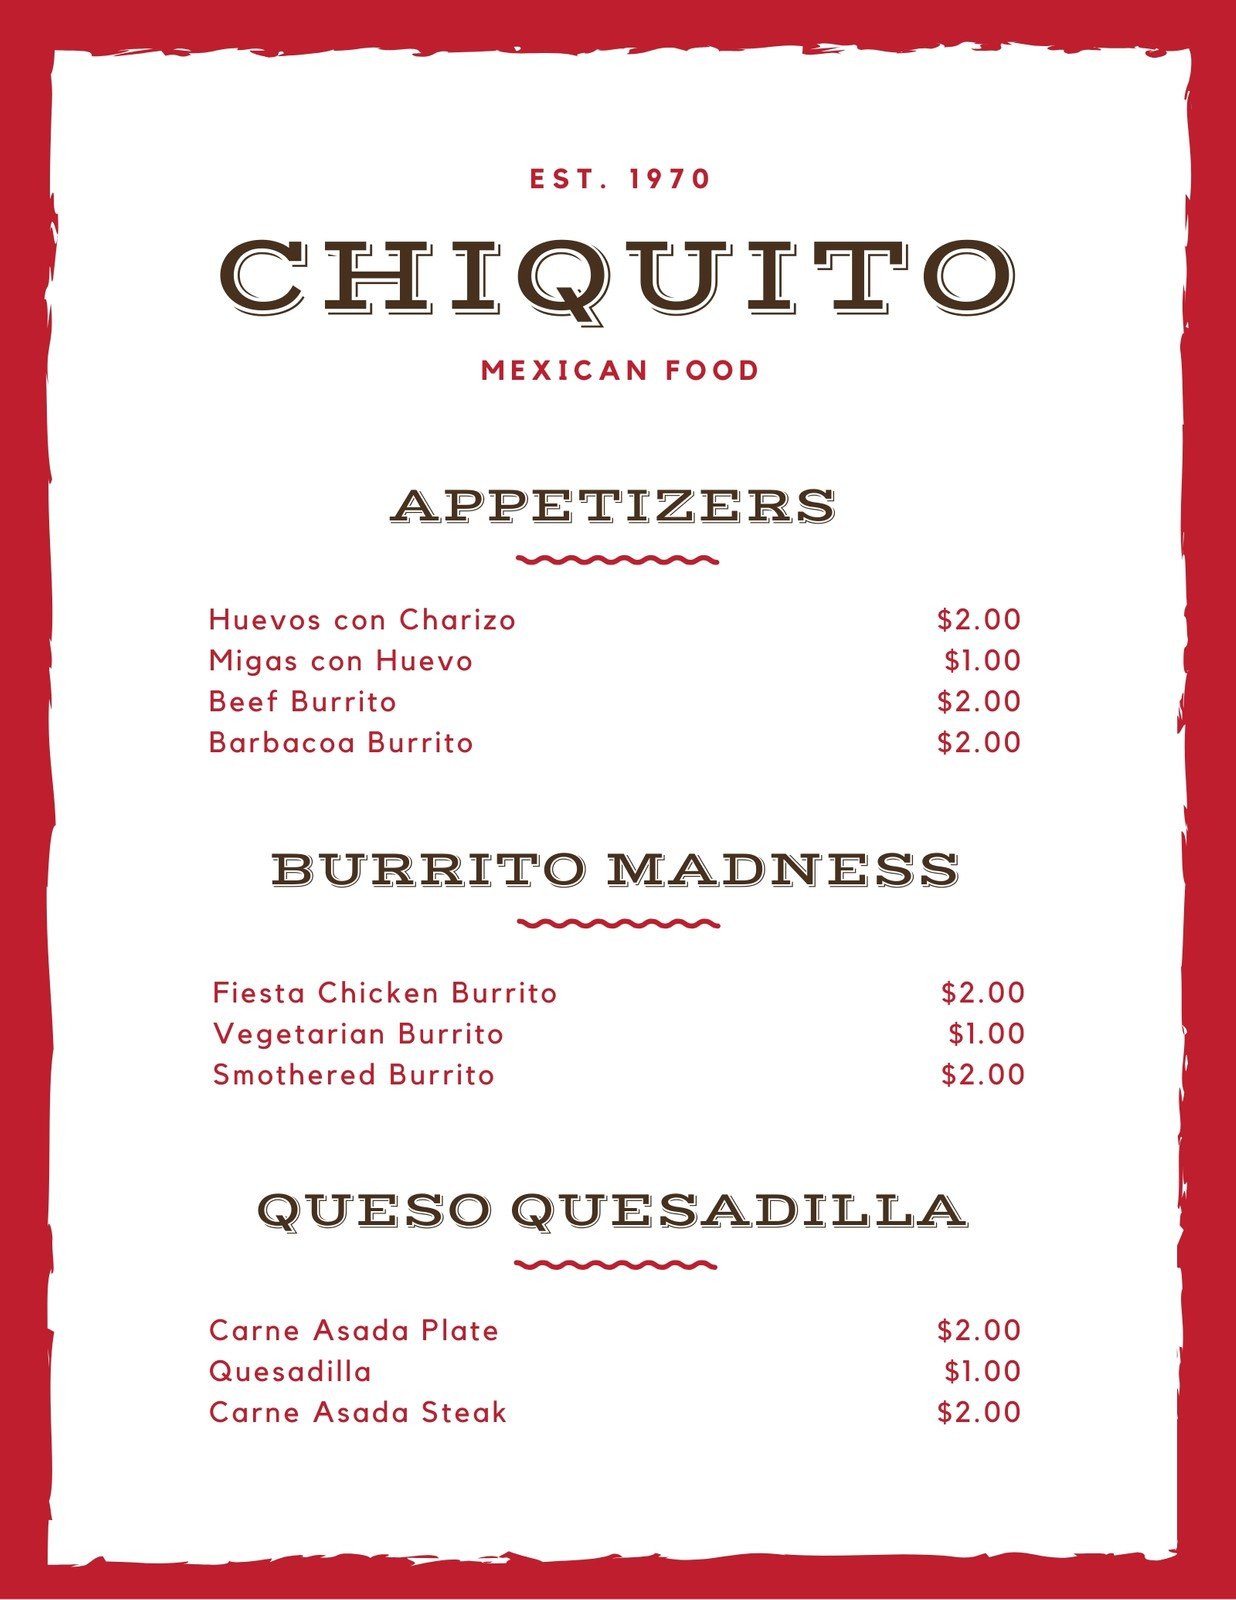 Free printable and customizable Mexican menu templates Canva